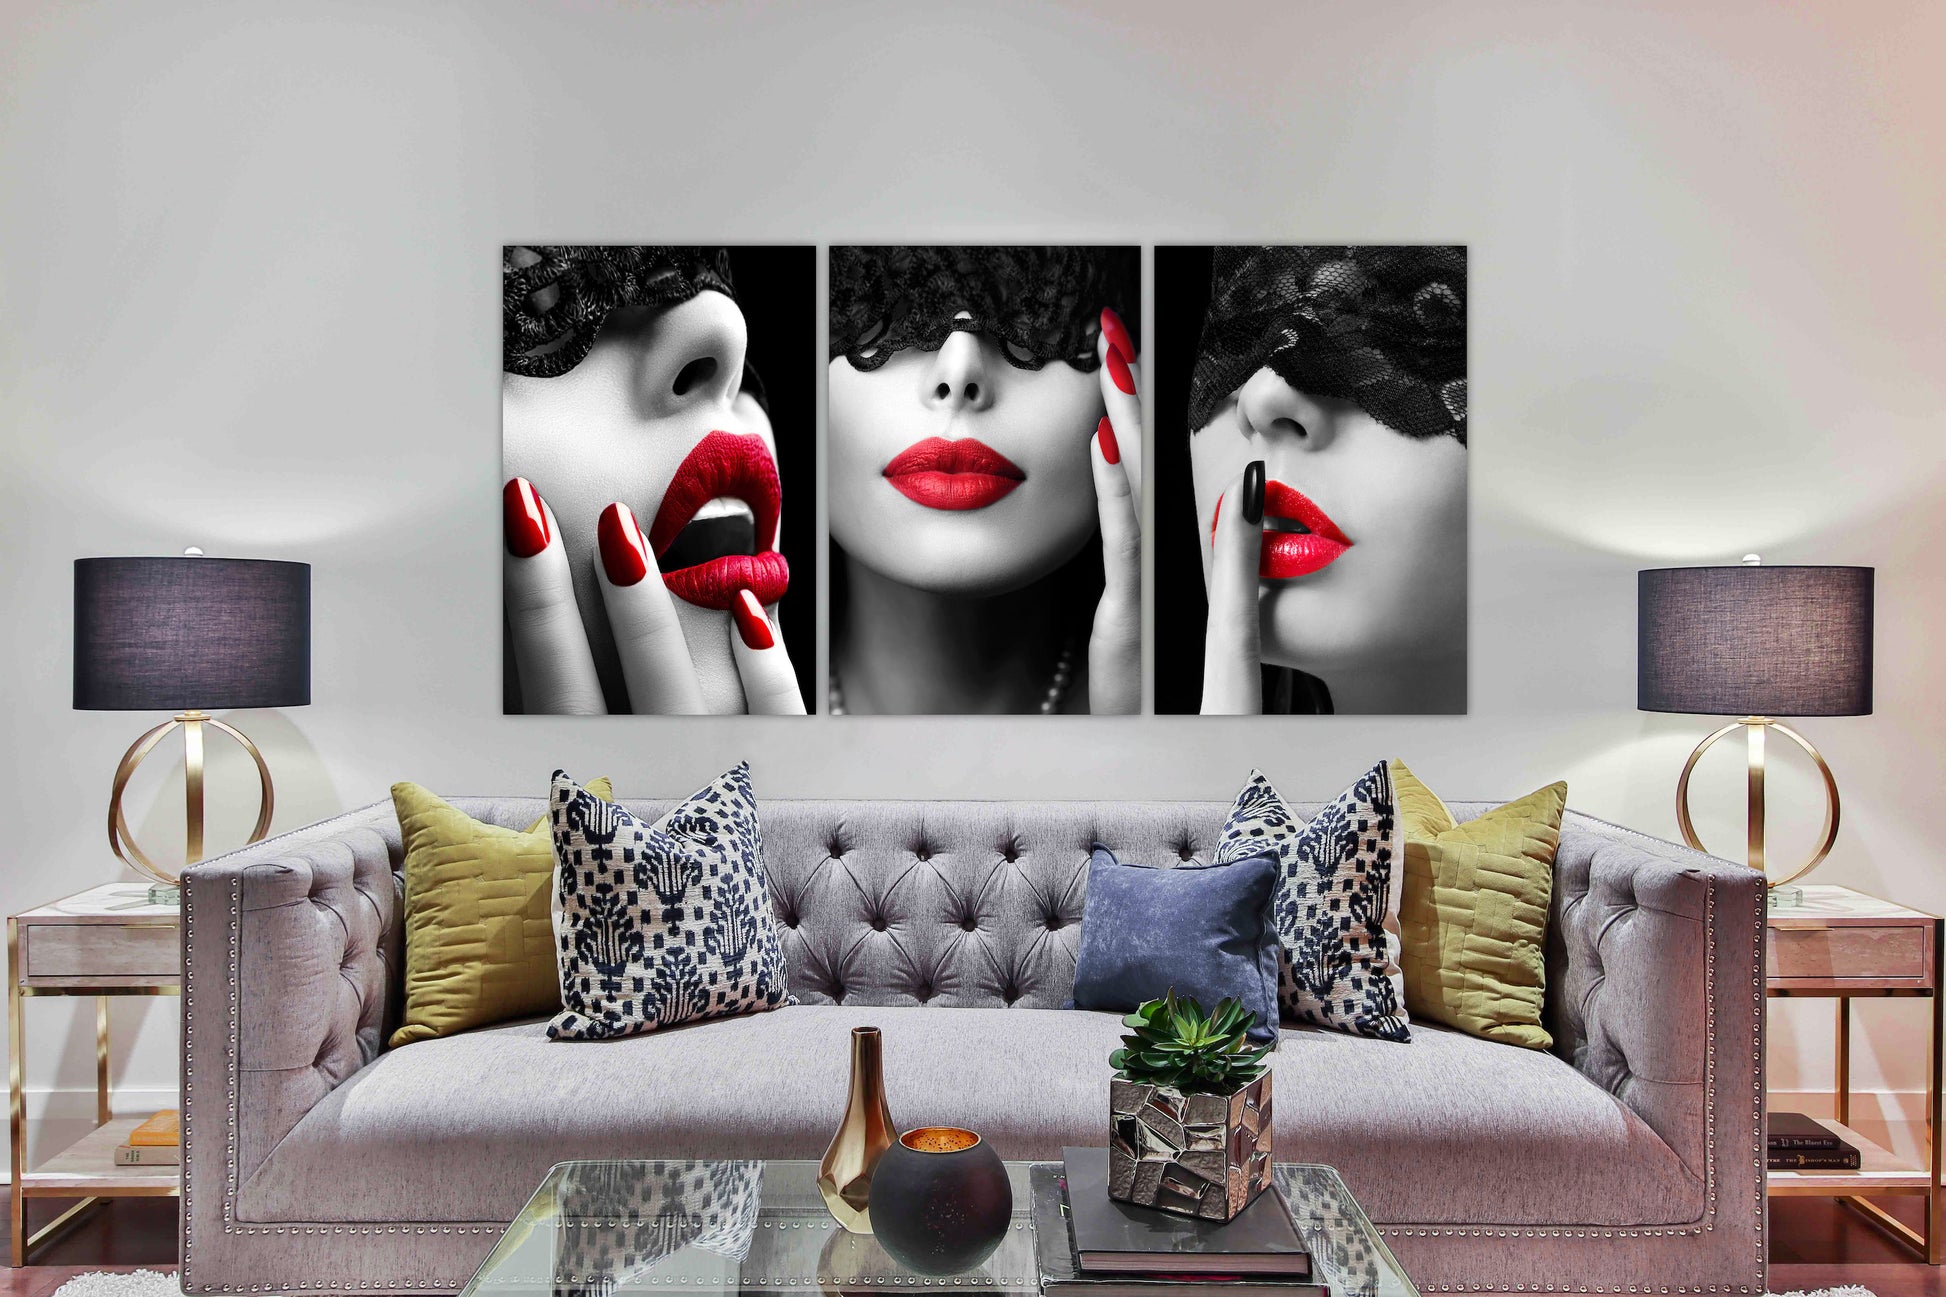 Women w/ Red Accents Glass Wall Art 24"x36" - Expo Home Decor